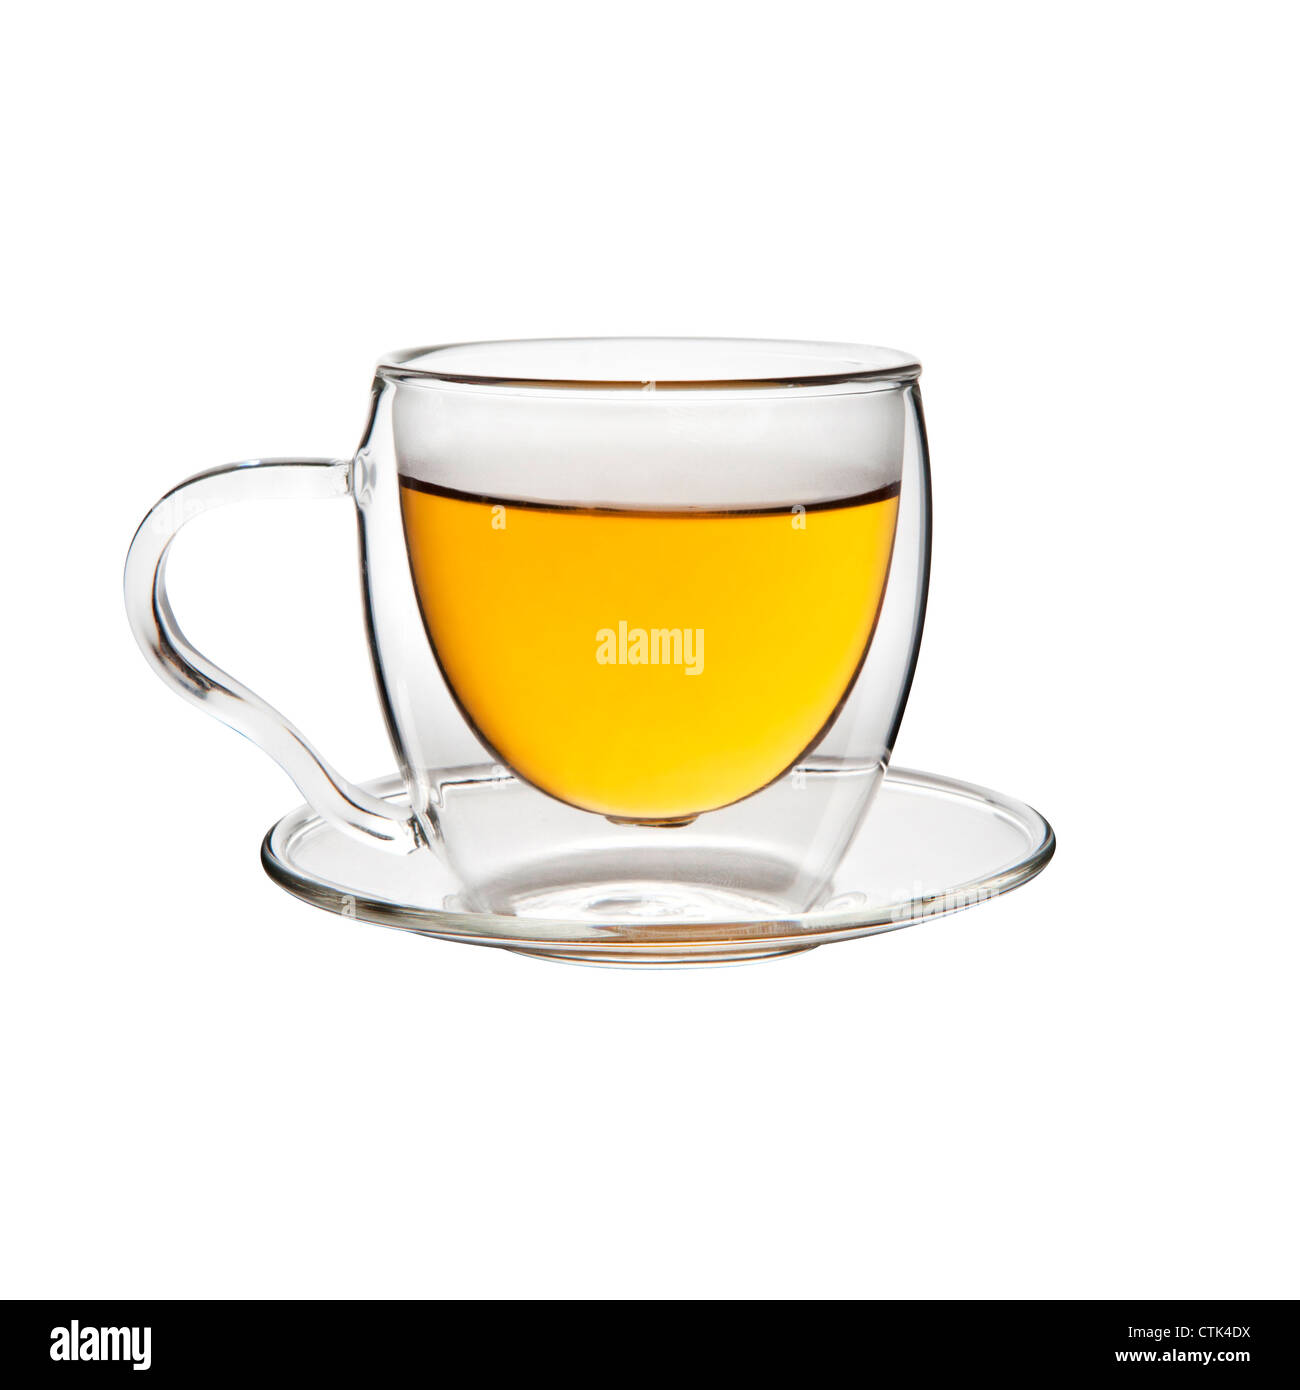 https://c8.alamy.com/comp/CTK4DX/glass-tea-cup-with-hot-black-tea-isolated-cutout-against-white-background-CTK4DX.jpg